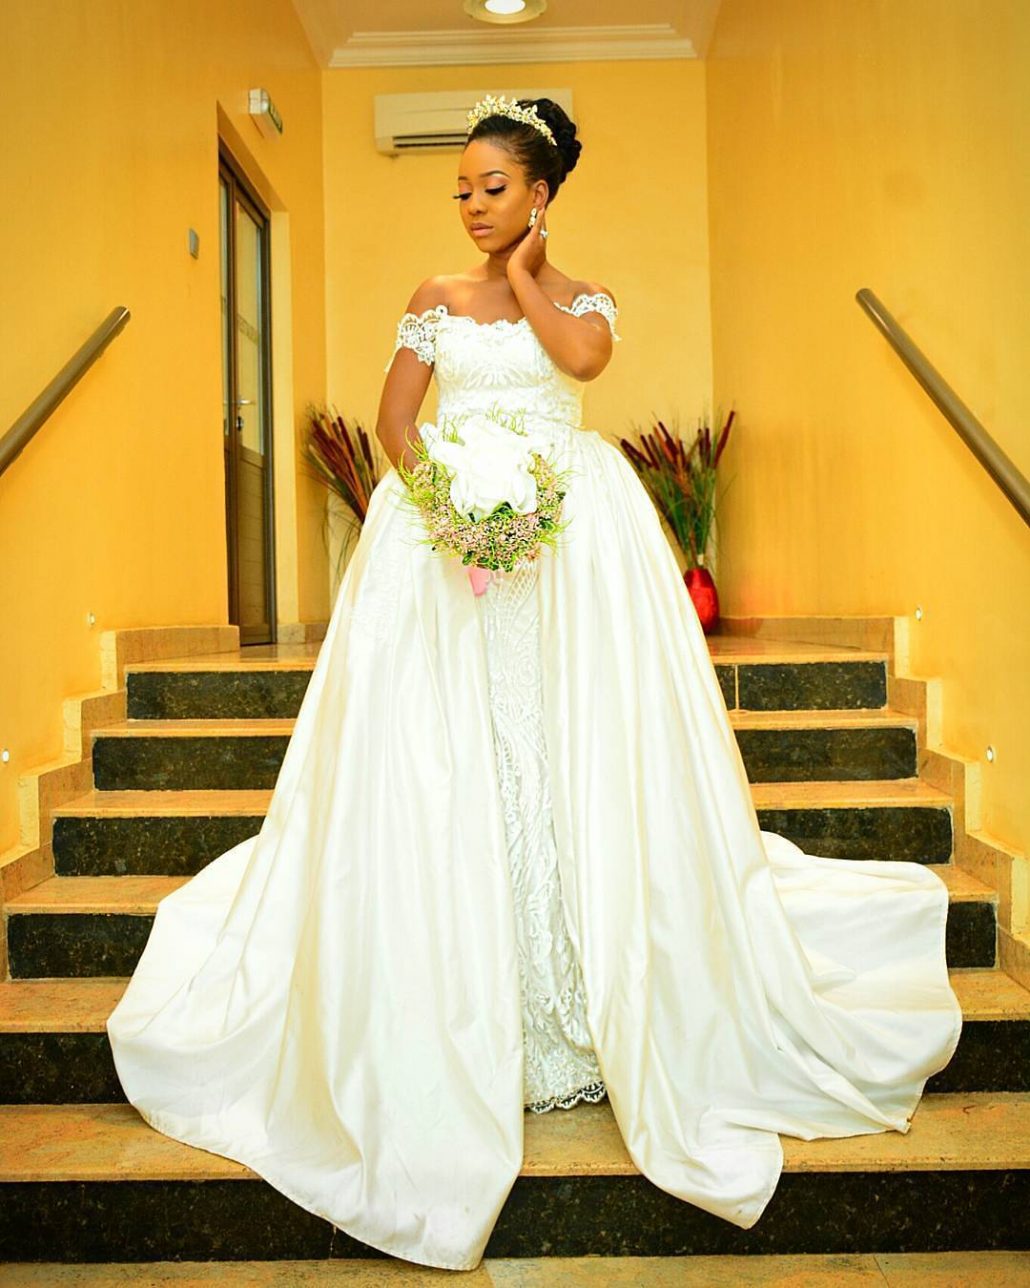 These Wedding Gowns Are Beautiful! A Million Styles